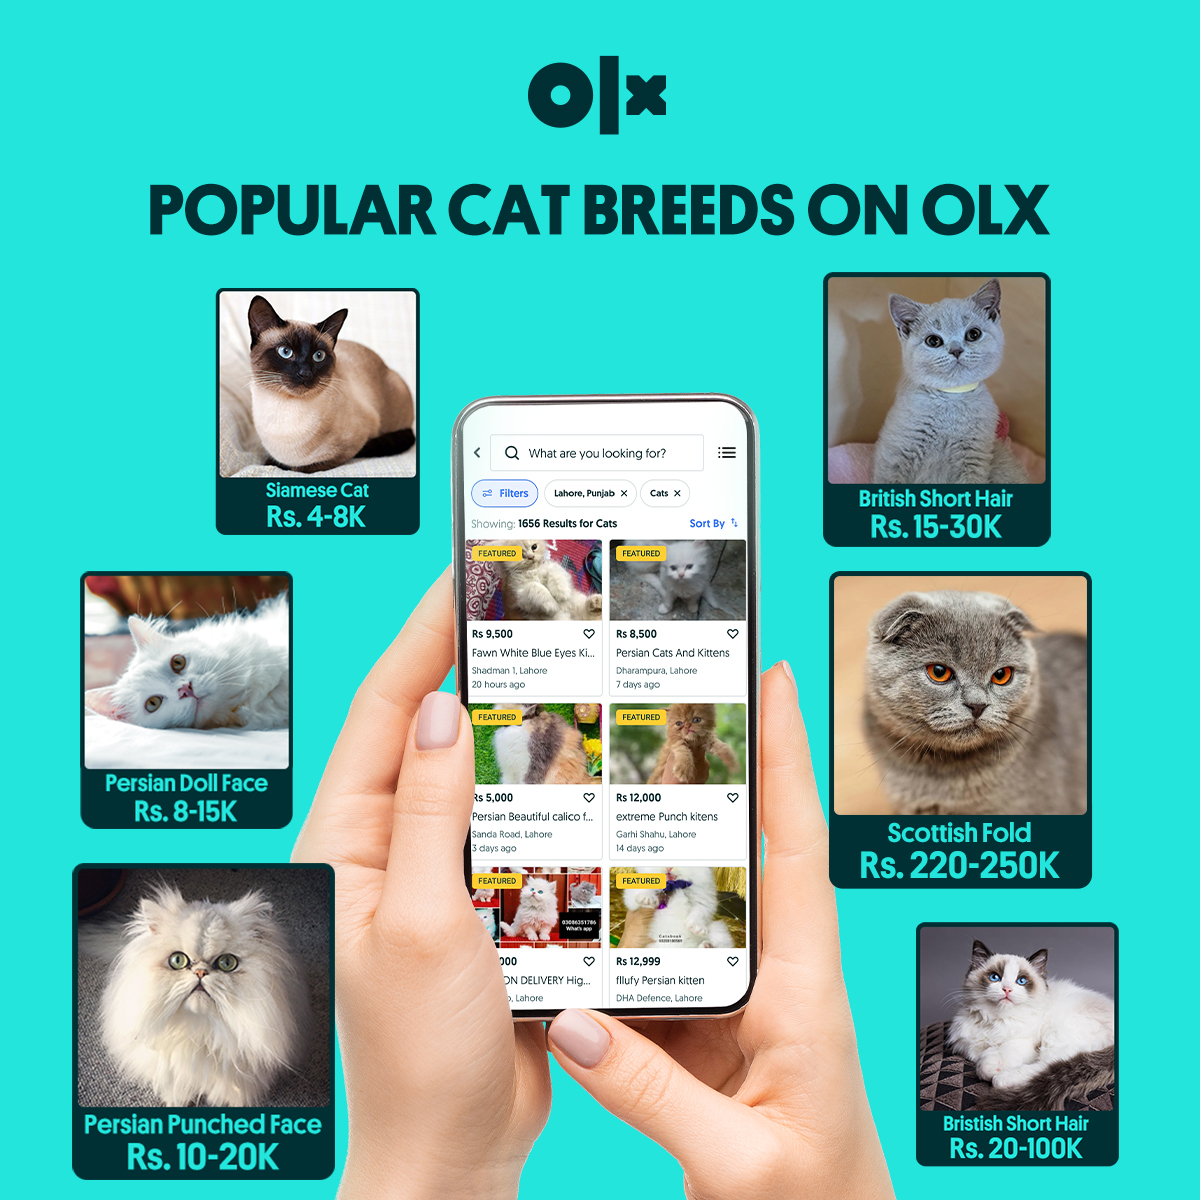 Let us know your favorite cat breed in the comments!
Find Cats on OLX: bit.ly/3GTAAOE
#olx #olxpakistan #buy #sell #catbreeds #cattypes #persiancat #catsonolx